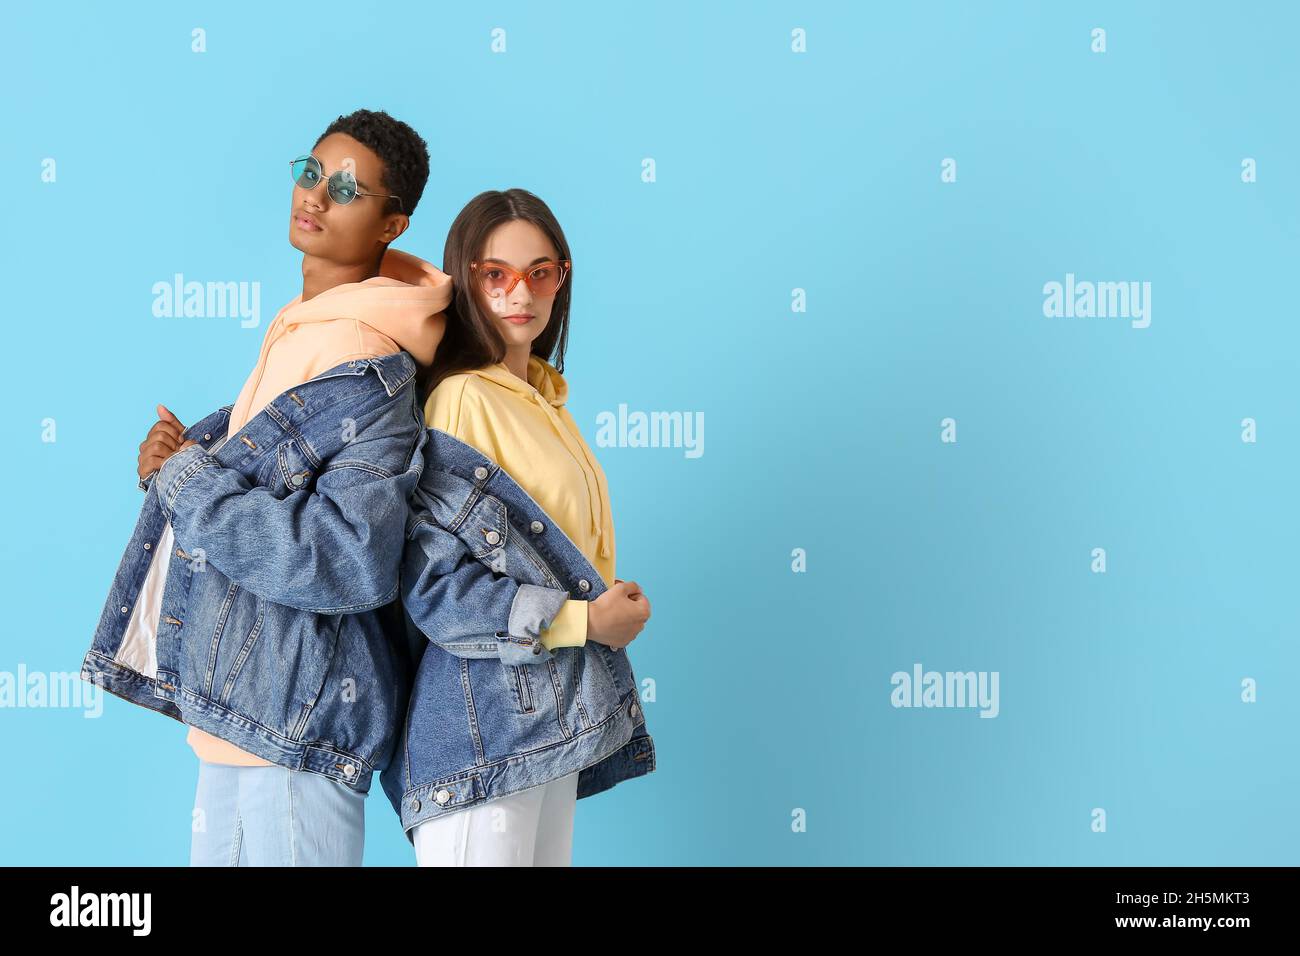 Stylish young couple in hoodies and denim jackets on blue background Stock Photo